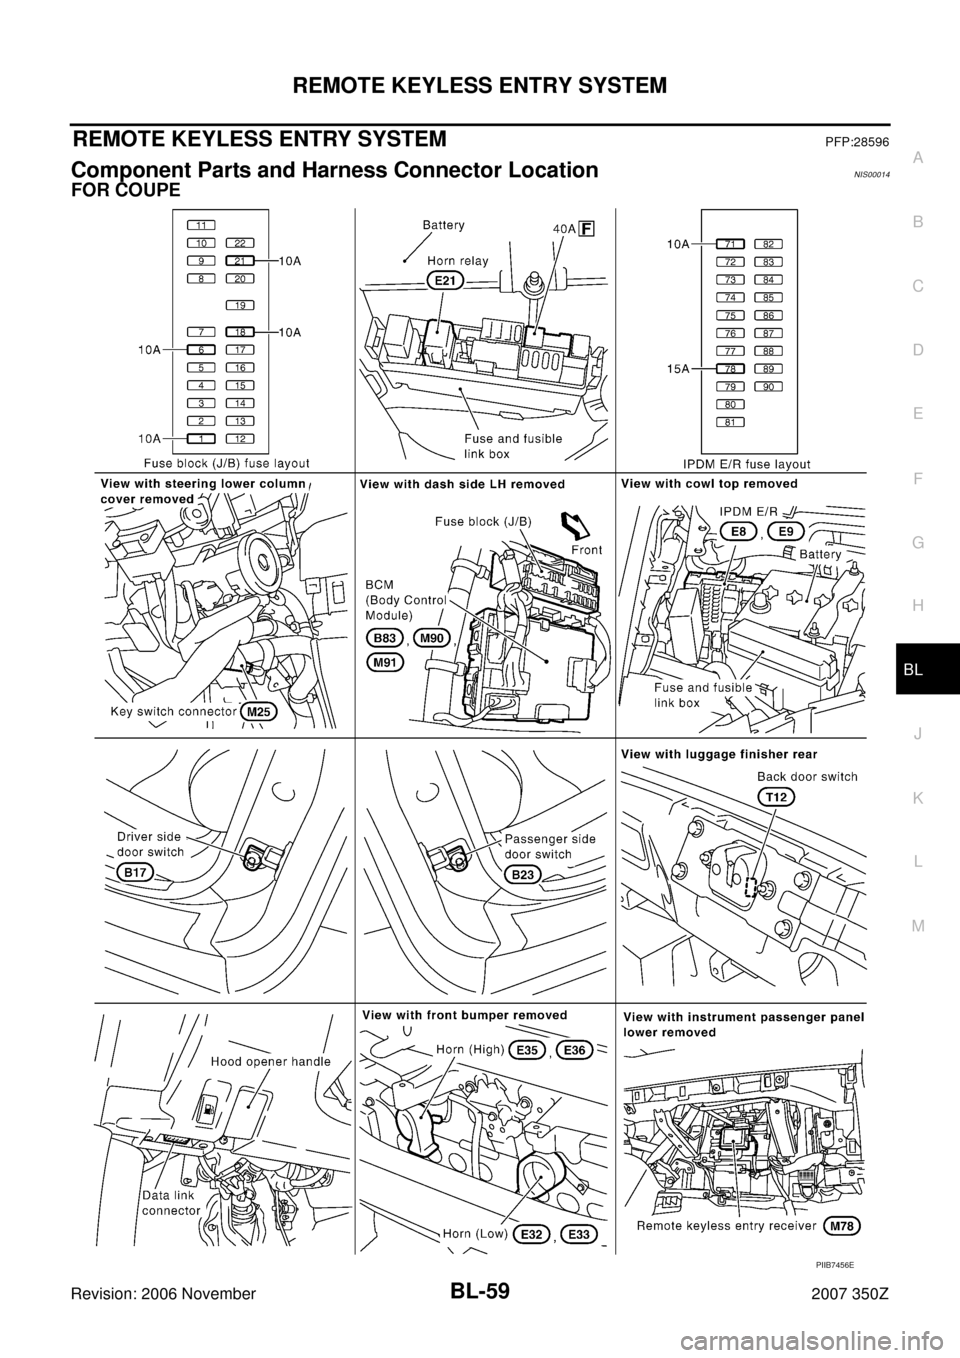 NISSAN 350Z 2007 Z33 Body, Lock And Security System Workshop Manual REMOTE KEYLESS ENTRY SYSTEM
BL-59
C
D
E
F
G
H
J
K
L
MA
B
BL
Revision: 2006 November2007 350Z
REMOTE KEYLESS ENTRY SYSTEMPFP:28596
Component Parts and Harness Connector LocationNIS00014
FOR COUPE
PIIB7